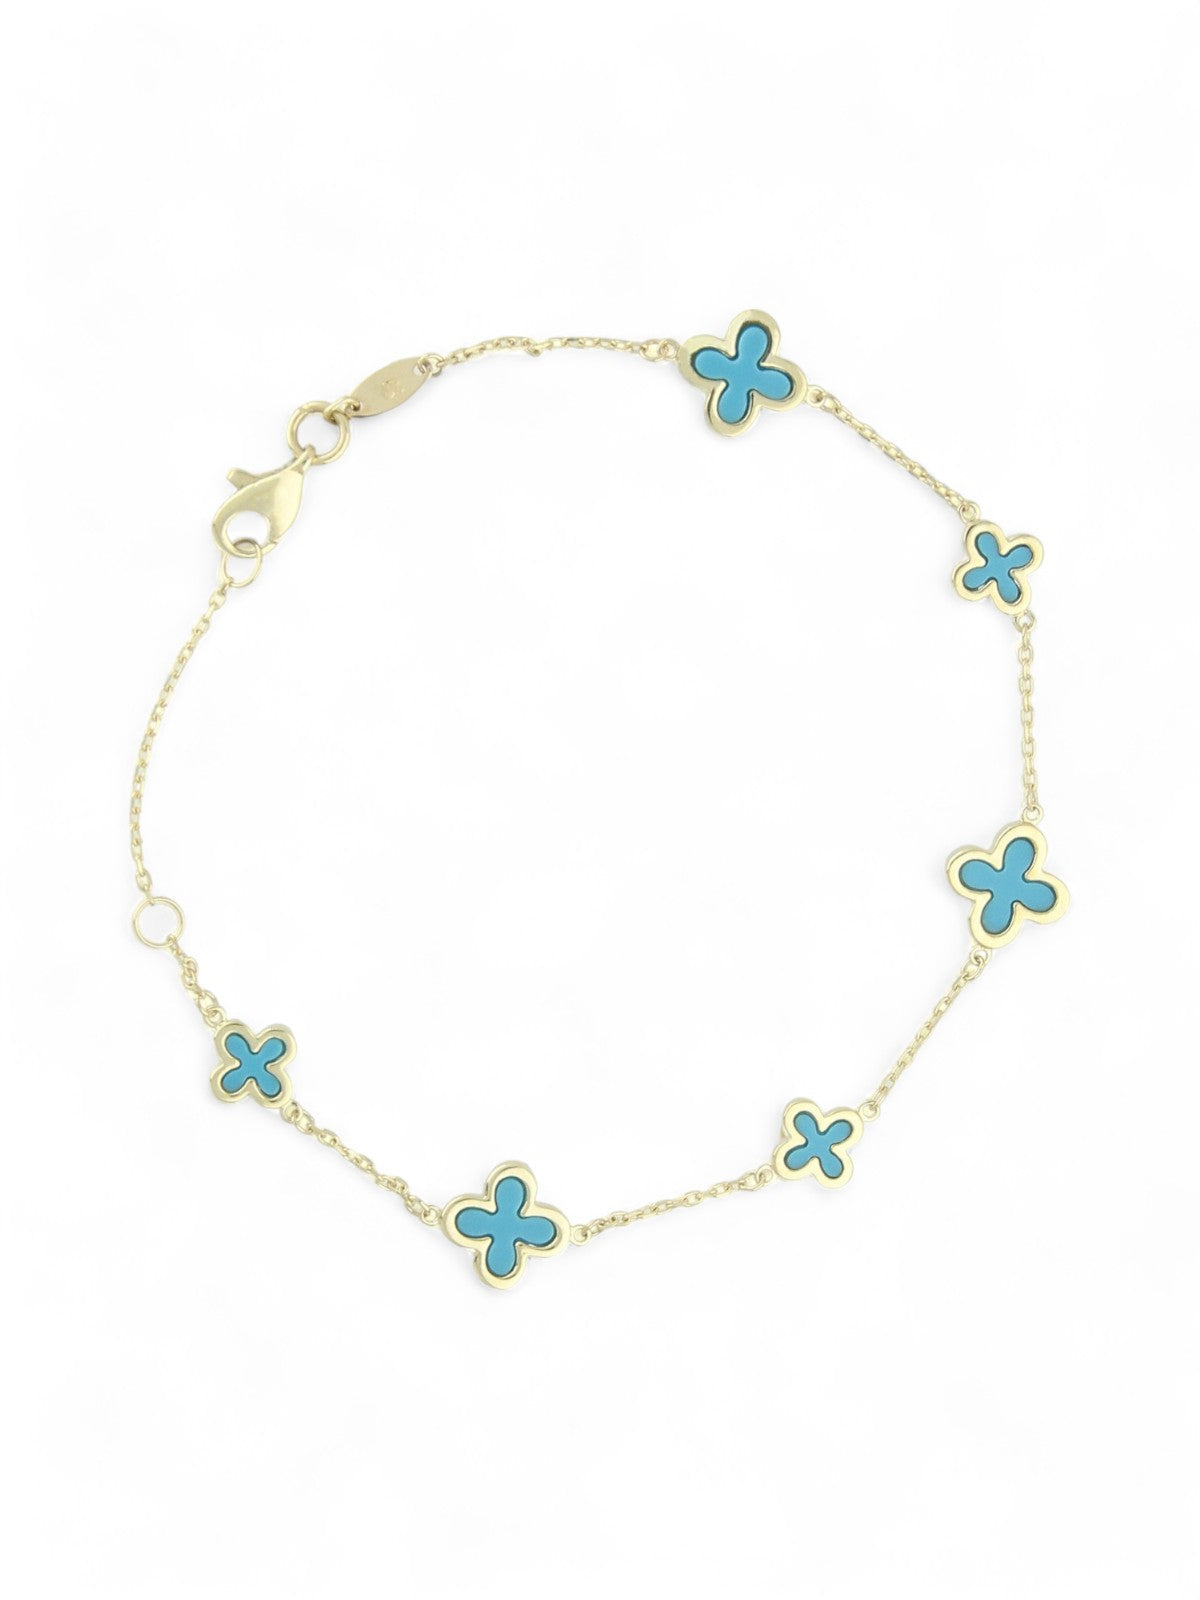 Turquoise Six Flower Bracelet in 9ct Yellow Gold